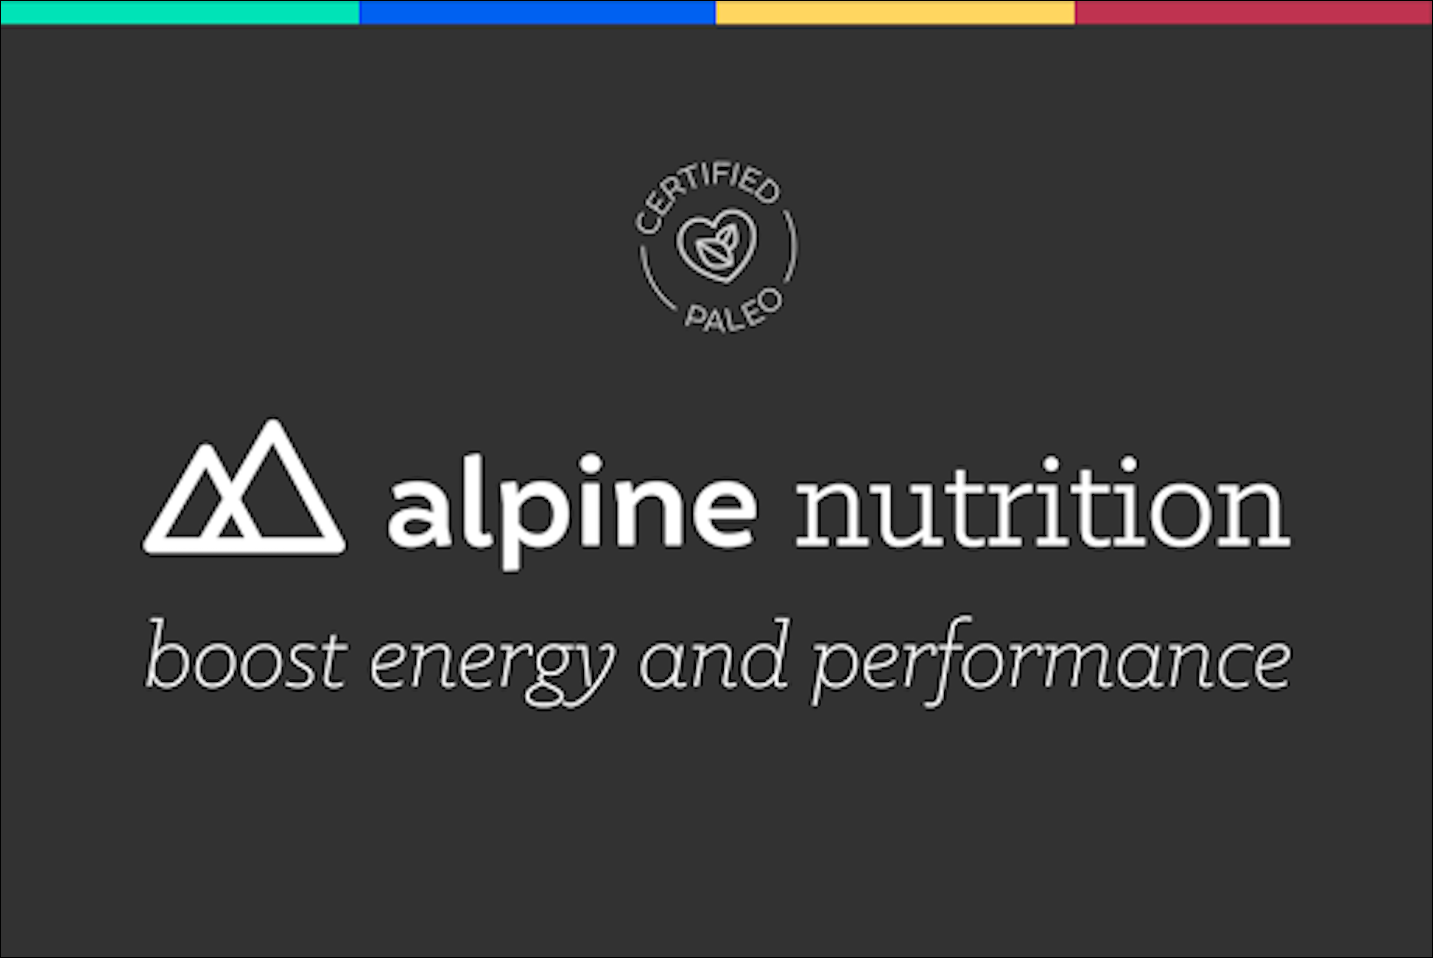 The Alpine Group Nutrition & Beverages brand banner.